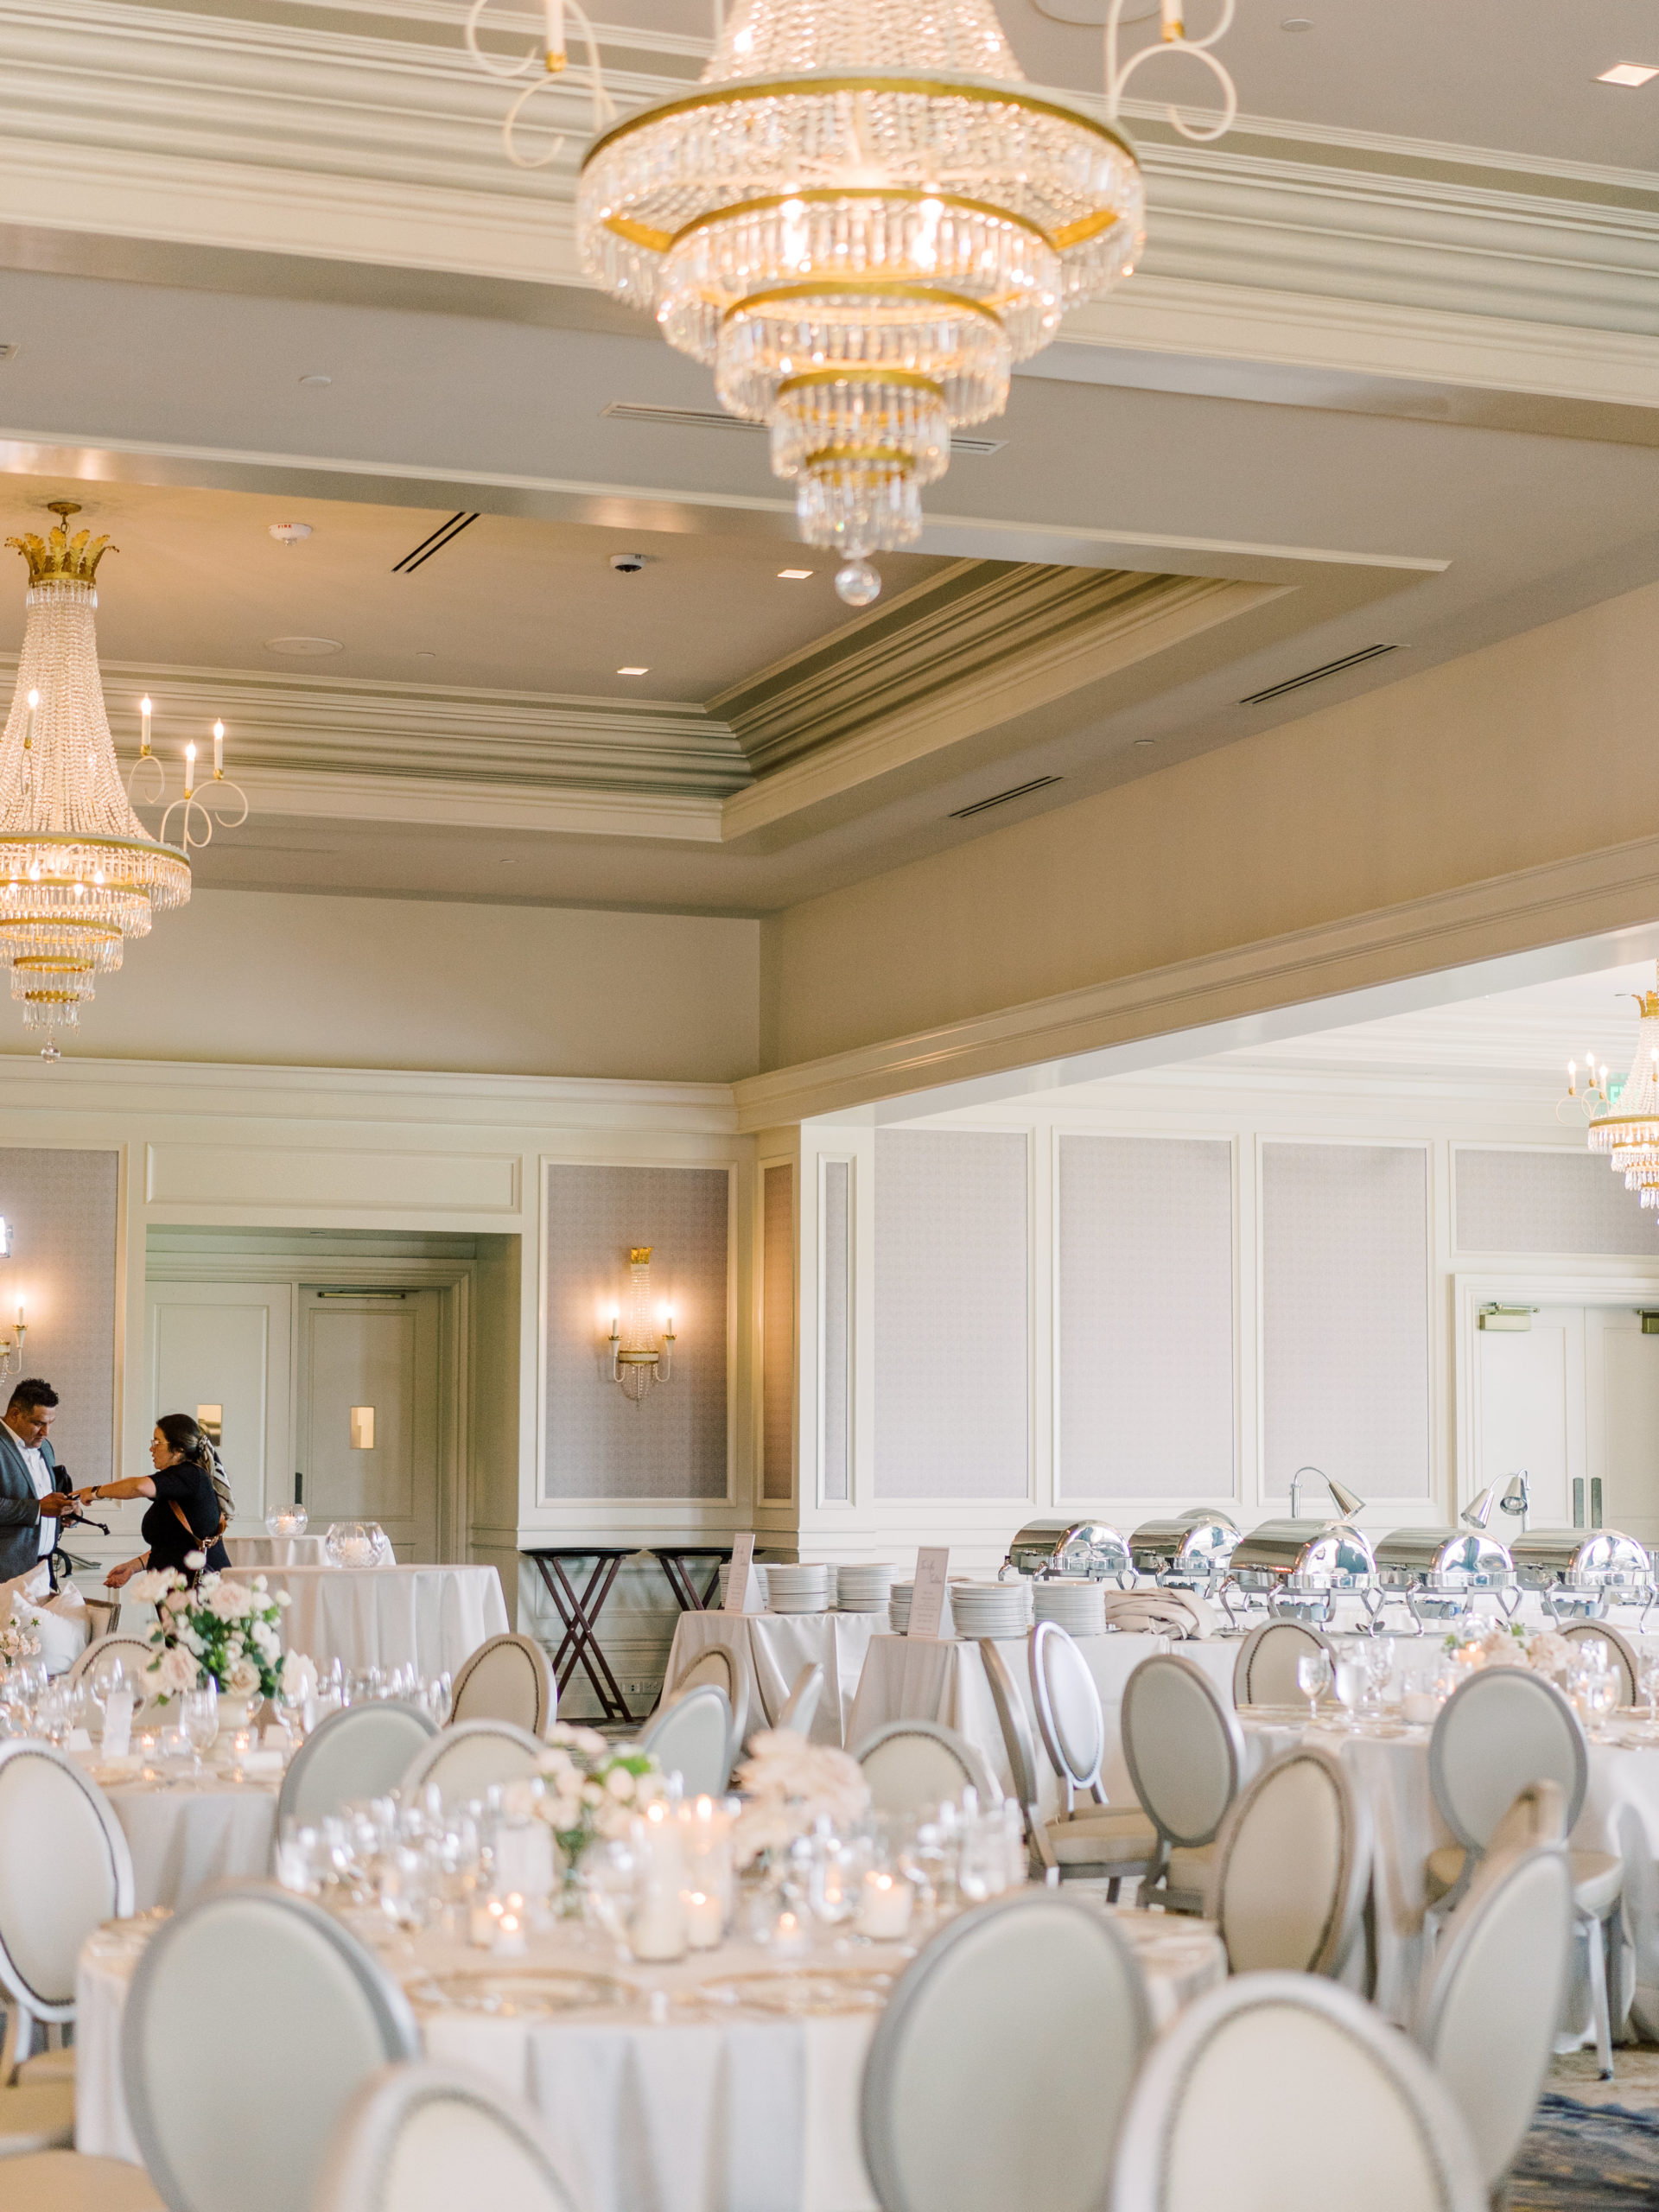 Grand Ballroom can seat up 600 people, with chandeliers on the ceiling and tables set up for a wedding reception